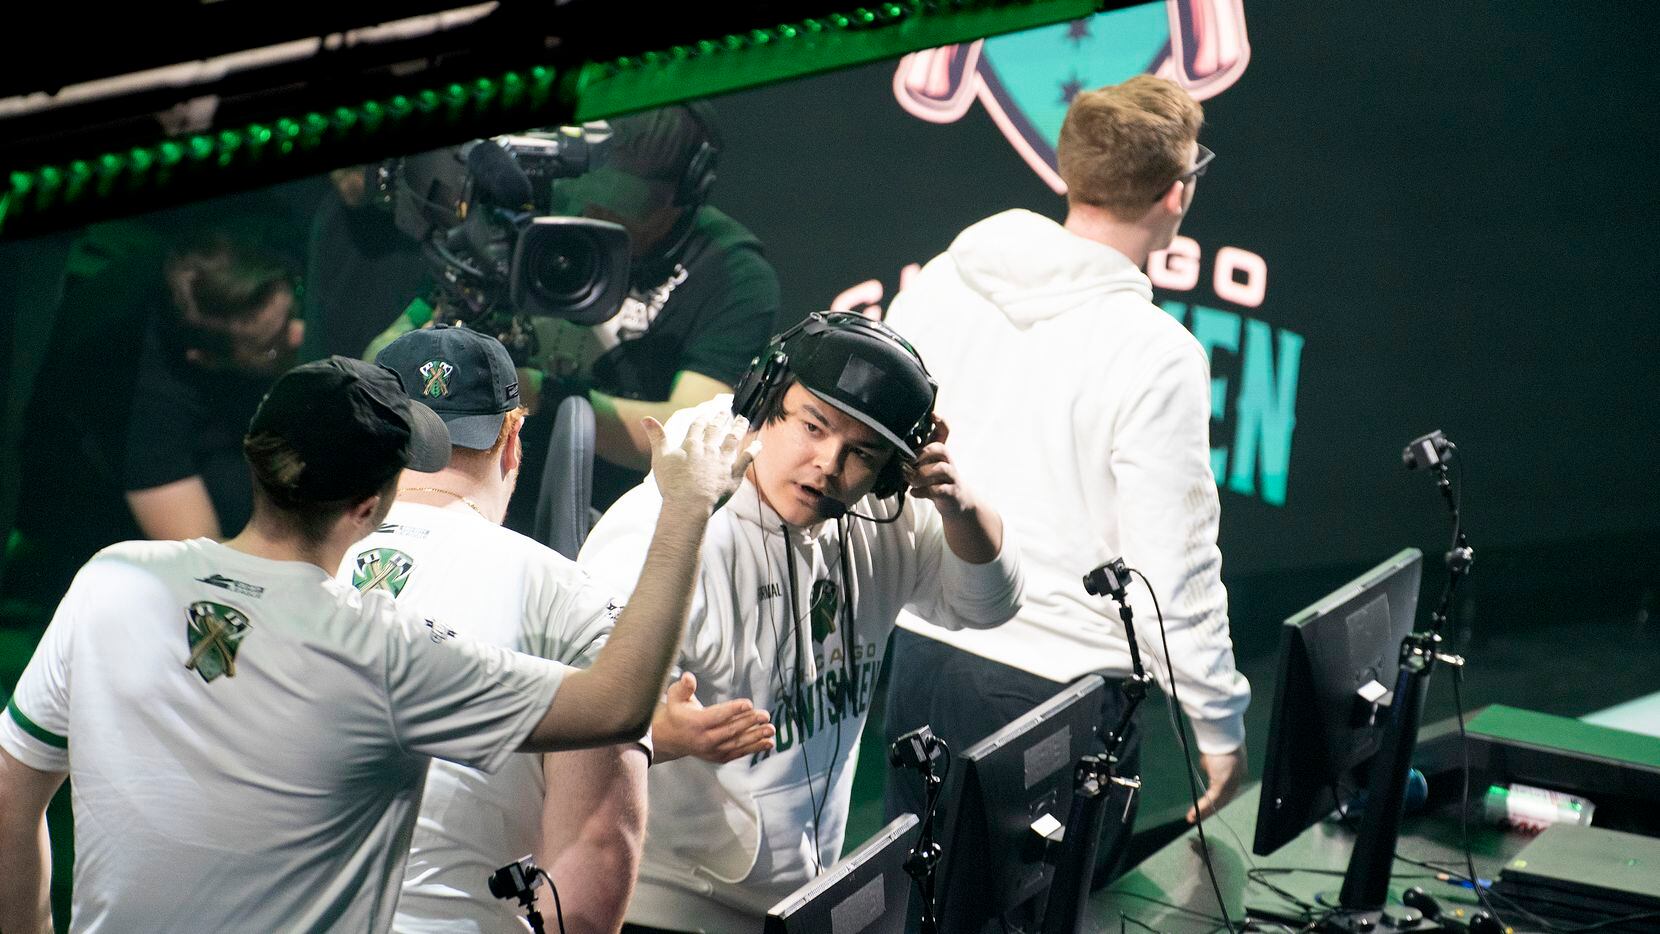 FormaL (Matthew  Piper) celebrates with Chicago Huntsmen teammates after their victory against Dallas Empire in the first match of in the Call of Duty League Launch Weekend at the Armory in Minneapolis, Minn., January 24, 2020.